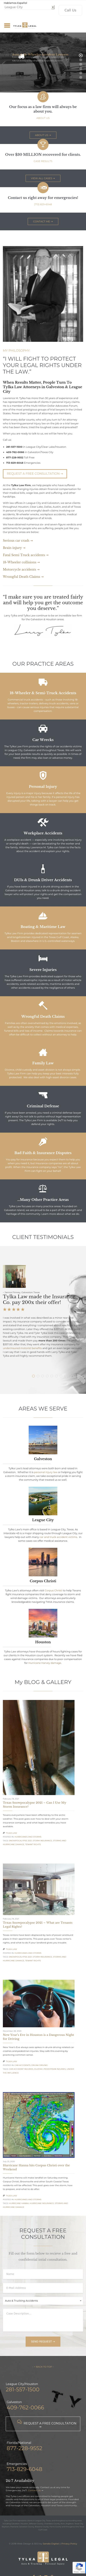 Tylka Law Firm and Mediation Center - League City TX Lawyers